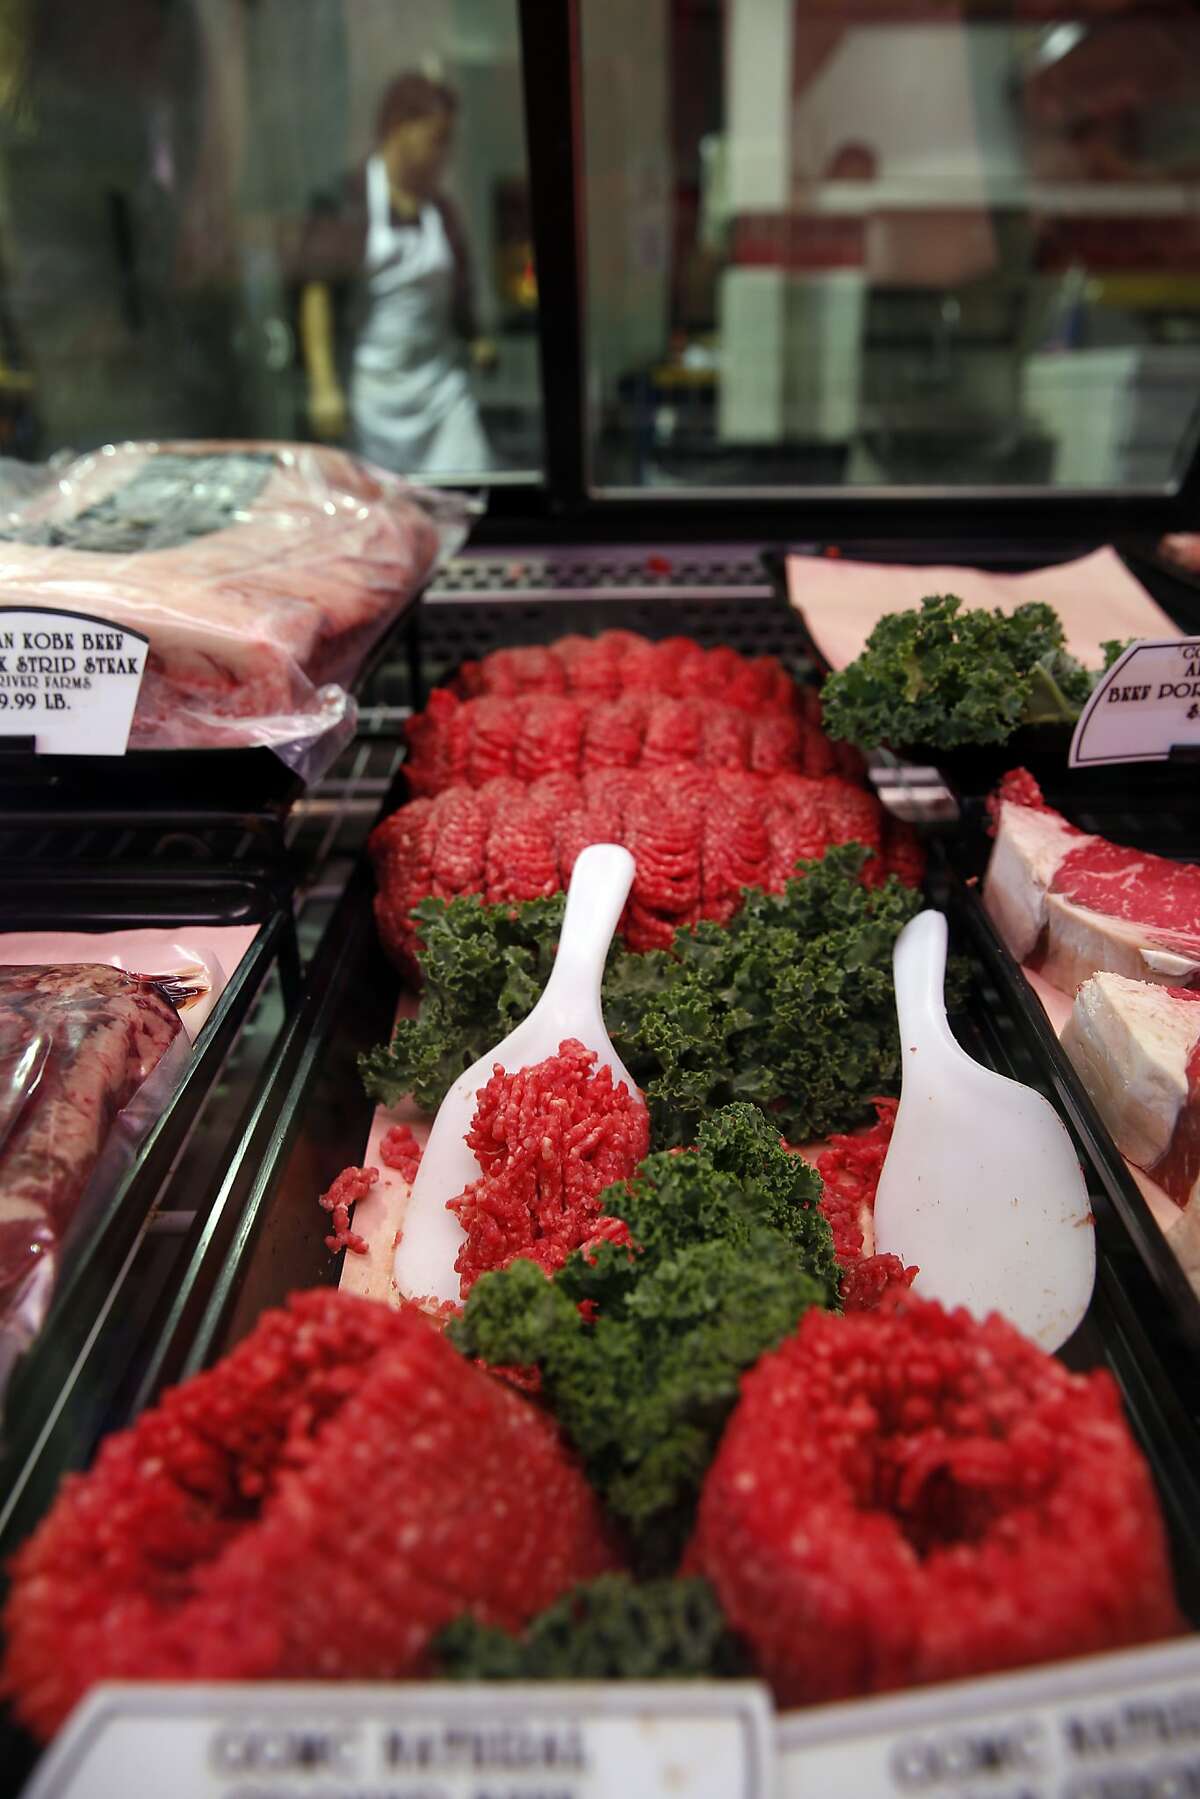 Ground beef in the display case at Golden Gate Meat, Co. in the Ferry Building in San Francisco, Calif., on Monday, Aug. 24, 2015.